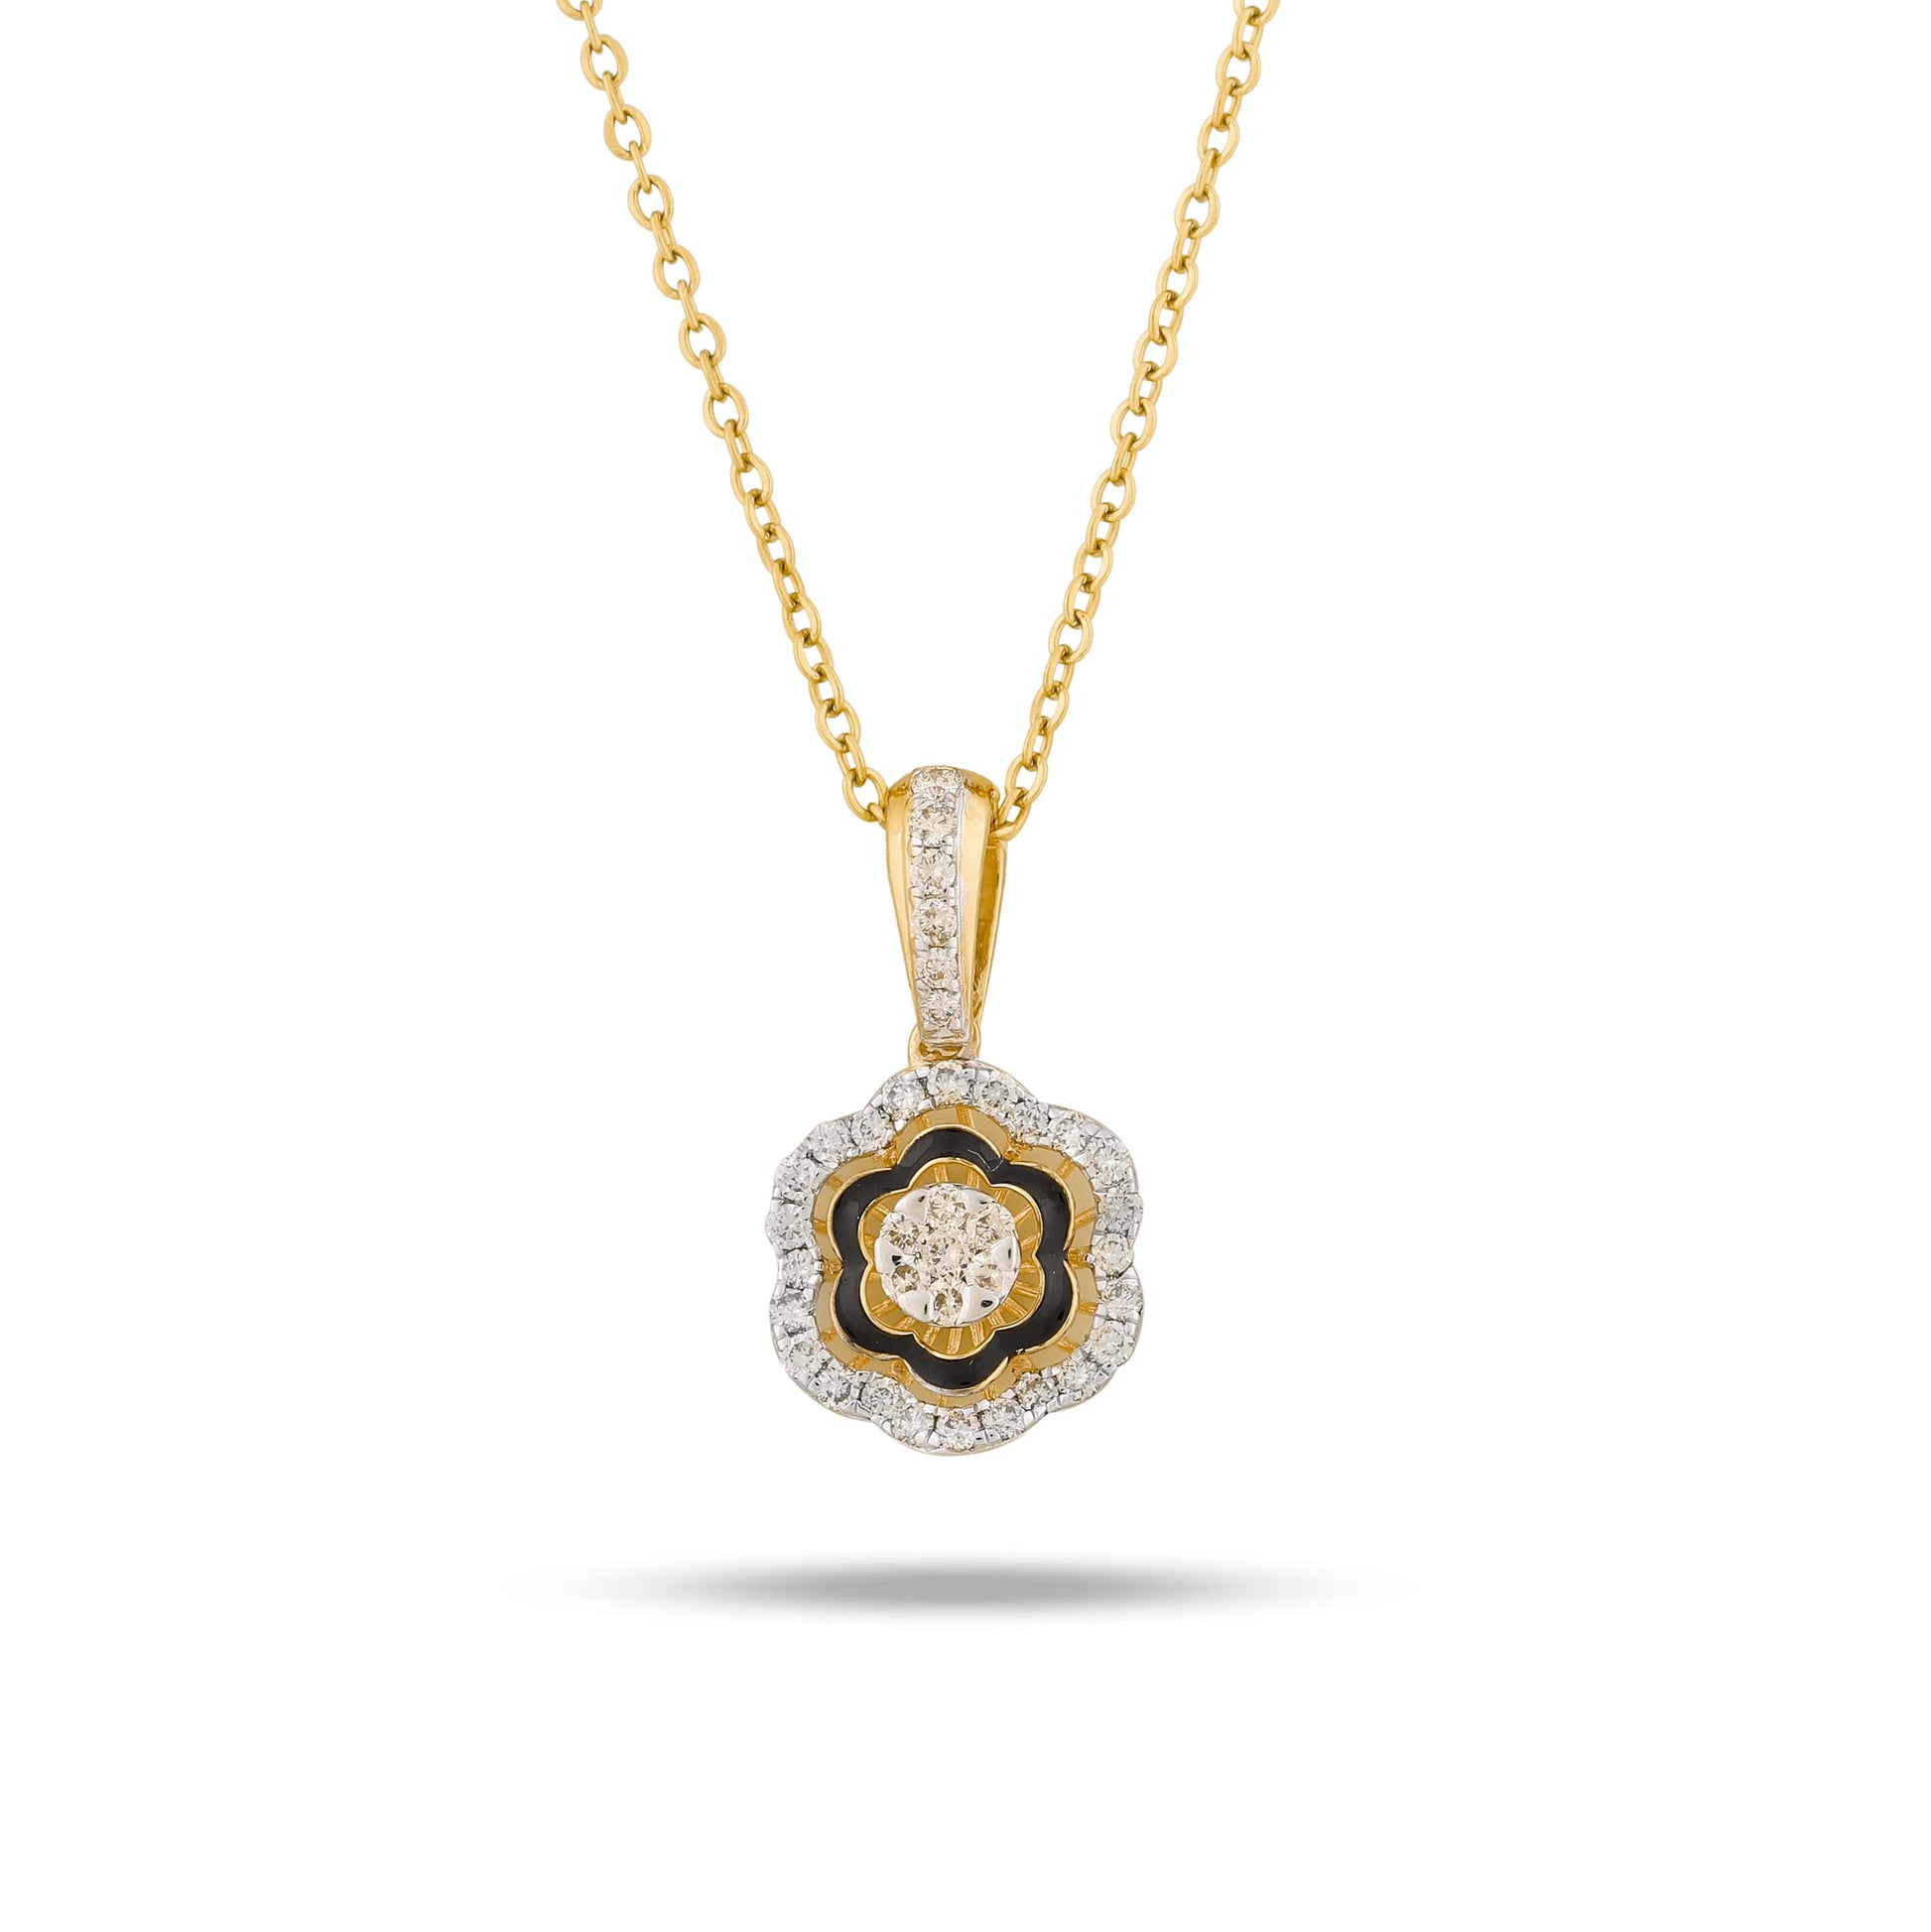 Floral Diamond Pendant in yellow gold